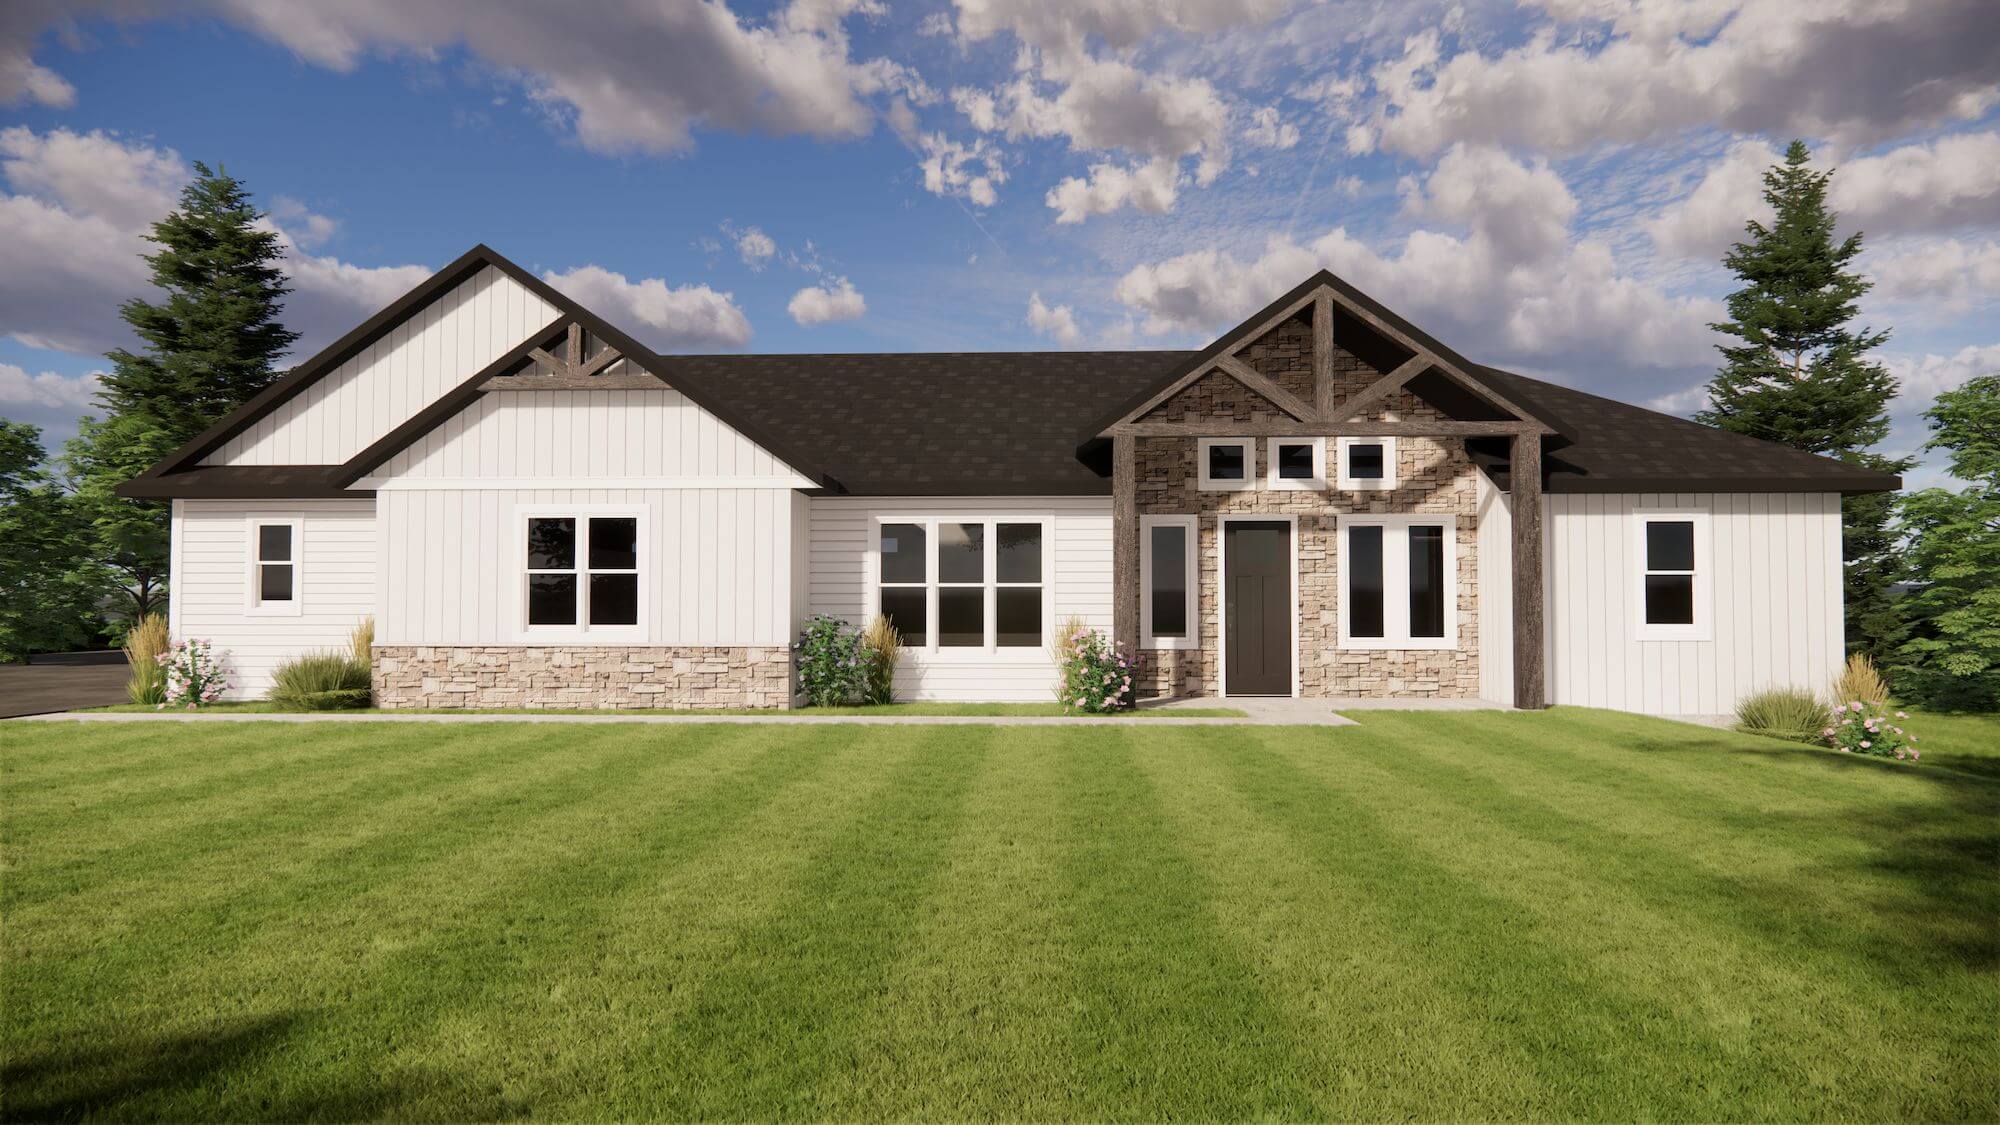 Home #2- Woodubury Custom Homes
148636 SMORE LANE  •  MOSINEE, WI
4 BED / 3.5 BATH  •  3,506 SQ FT  •  CUSTOM HOME
 
Features- • Dining room with custom trim details 
   and built-in wine rack
• Walk-through pantry with handcrafted 
   barn door
• Custom Iron Stair Rail
• Stained Garage Floor

• Great Room featuring lighted 
   suspended beams
• Home office
• Family living space with wet bar
• Play area with toy storage